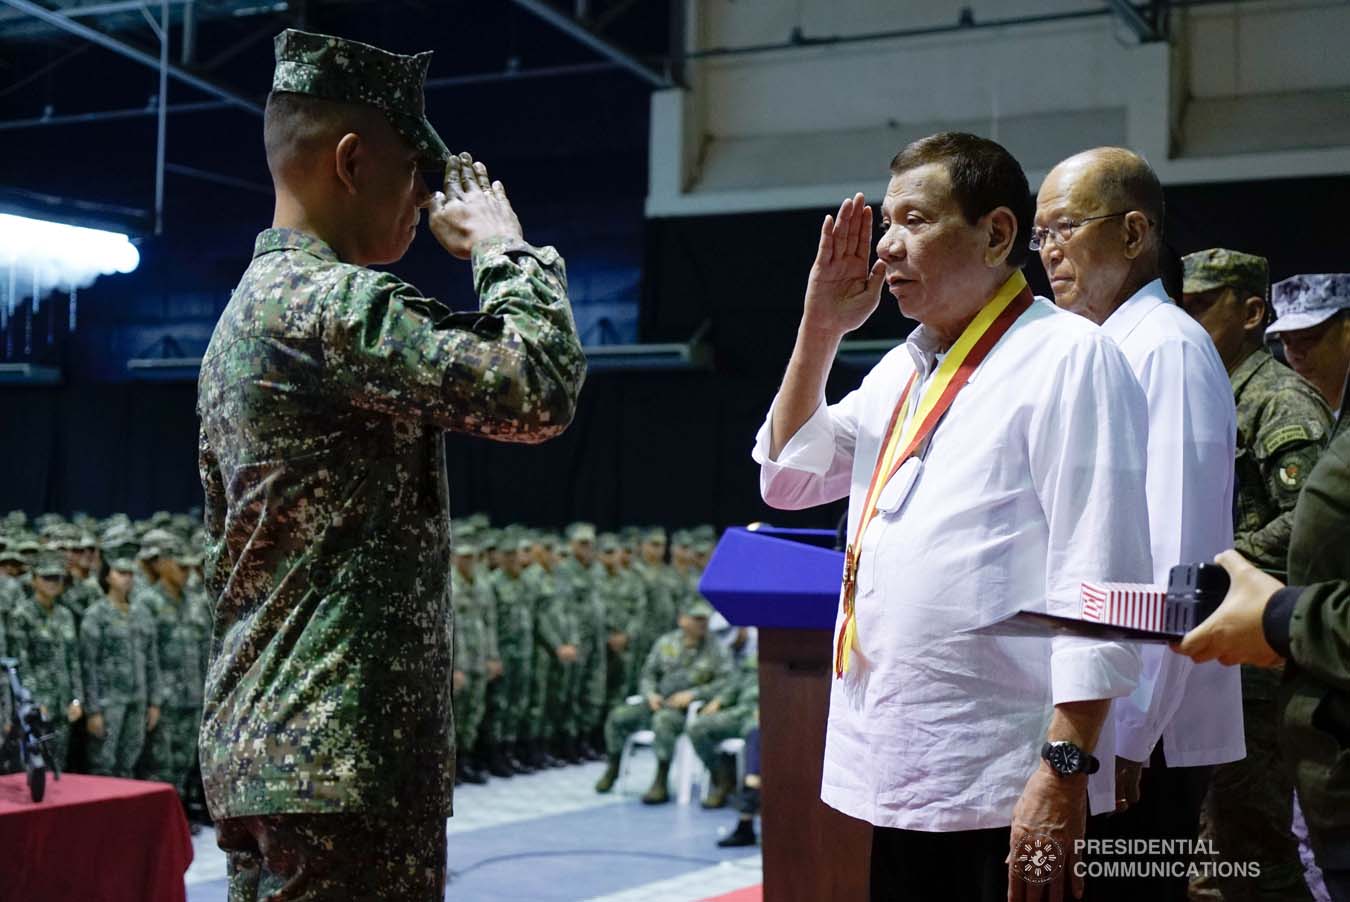 President Rodrigo Roa Duterte salutes one of the Philippine Marine Corps (PMC) personnel, who was conferred with the Order of Lapu-Lapu Rank of Kamagi, during his visit to the PMC headquarters at Fort Bonifacio in Taguig City on January 13, 2020. The President honored the PMC personnel who took part in the liberation of Marawi City from the terrorists. KING RODRIGUEZ/PRESIDENTIAL PHOTO